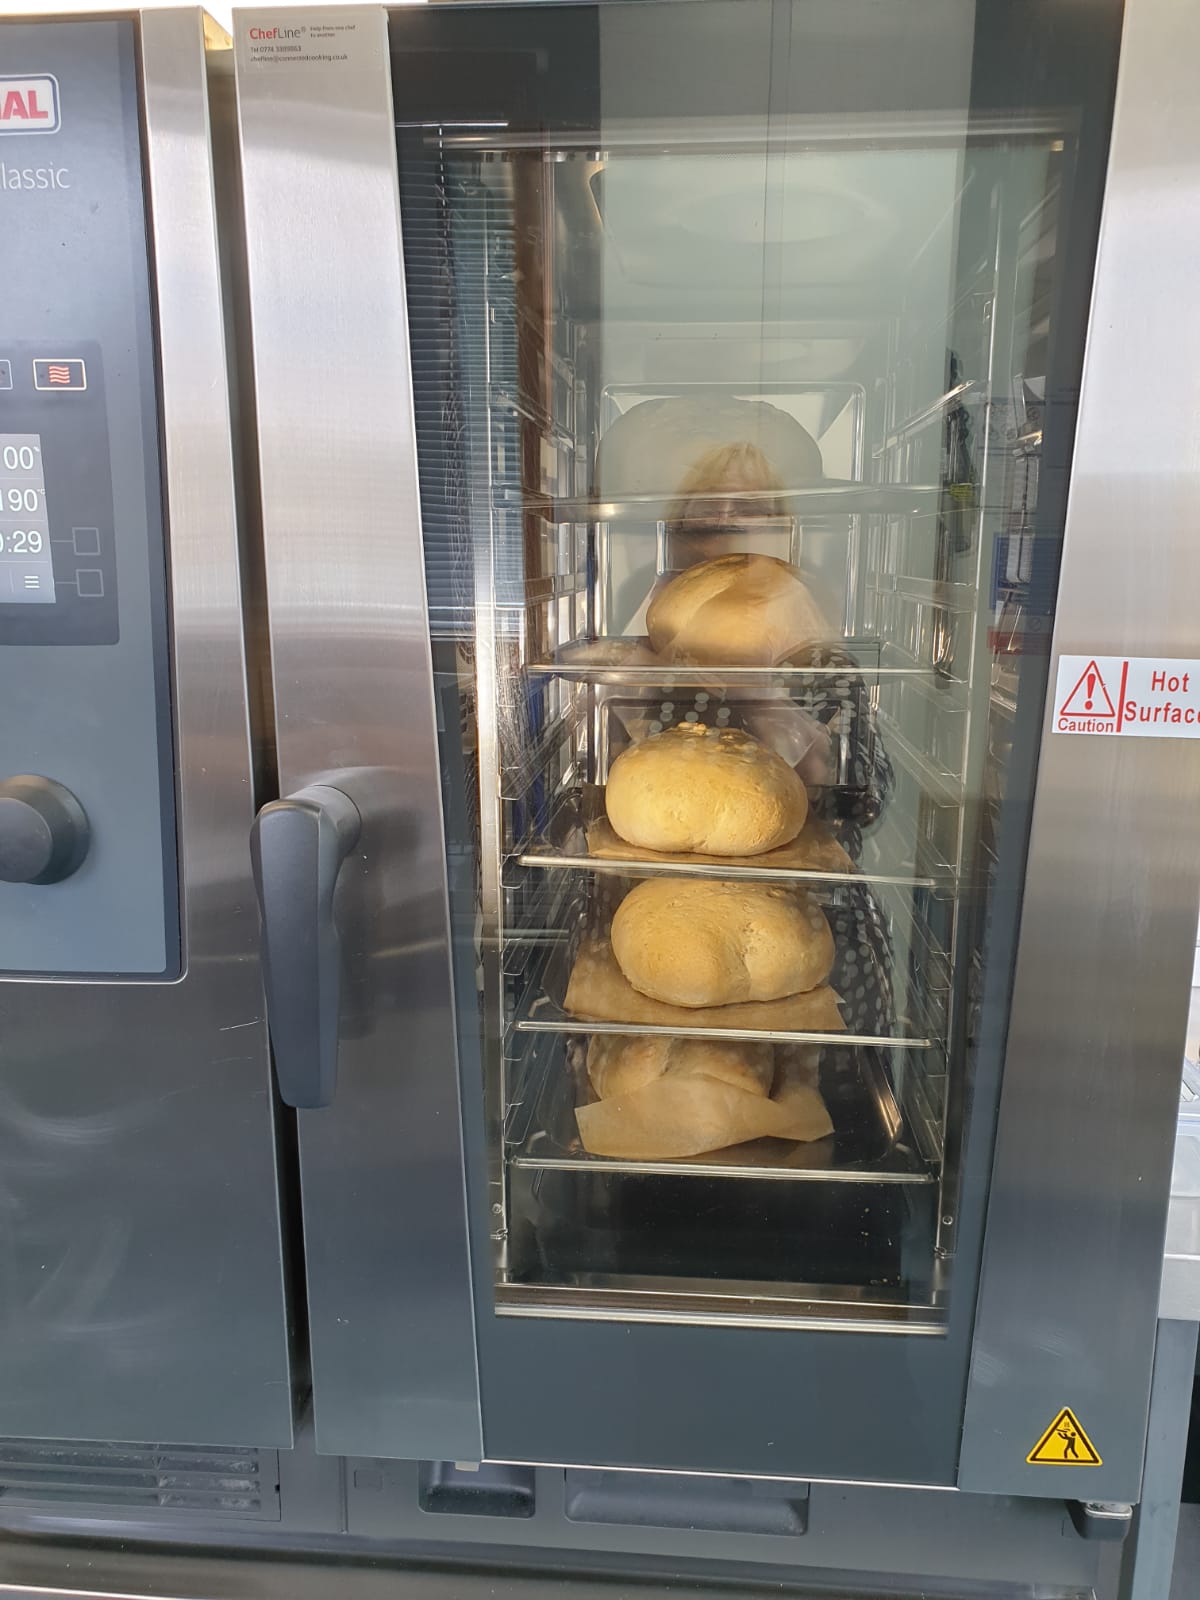 A tall catering oven with a glass door which shows the bread baking